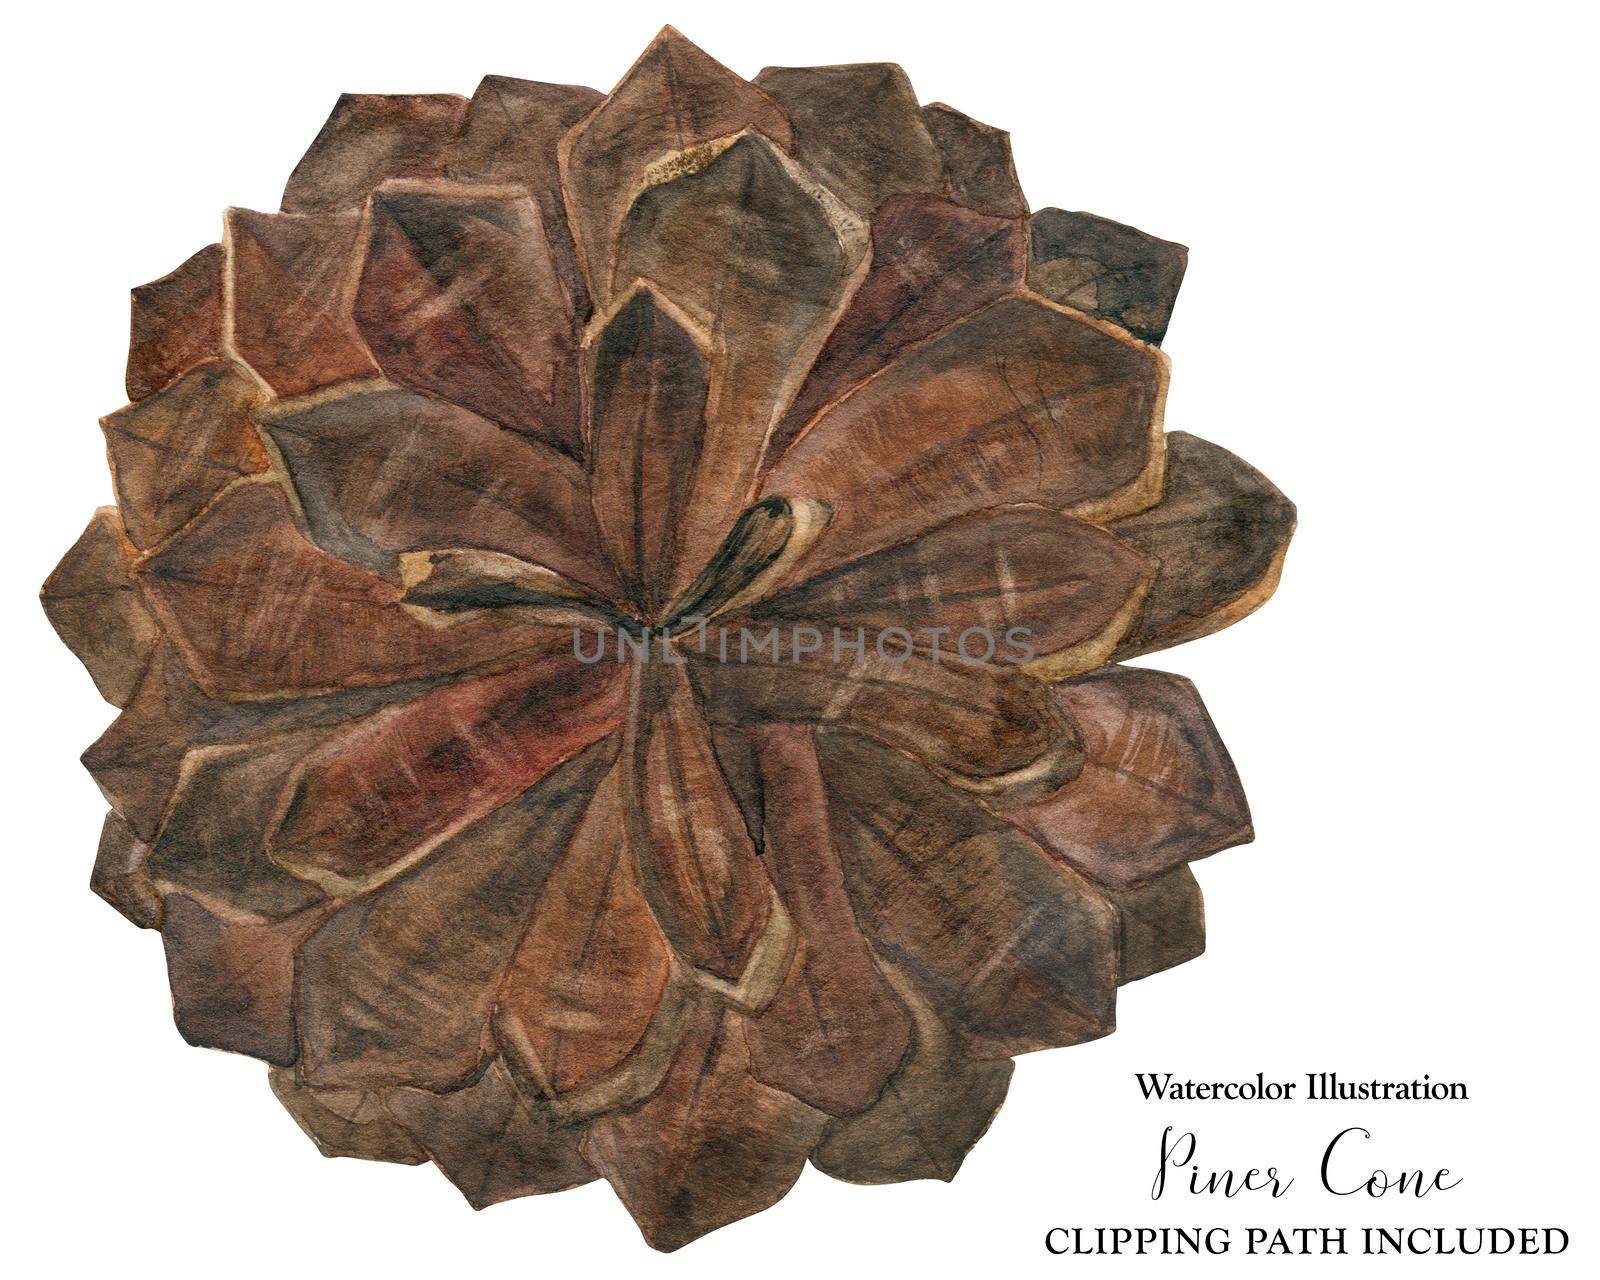 Winter Pine Cone, watercolor illustration with clipping path